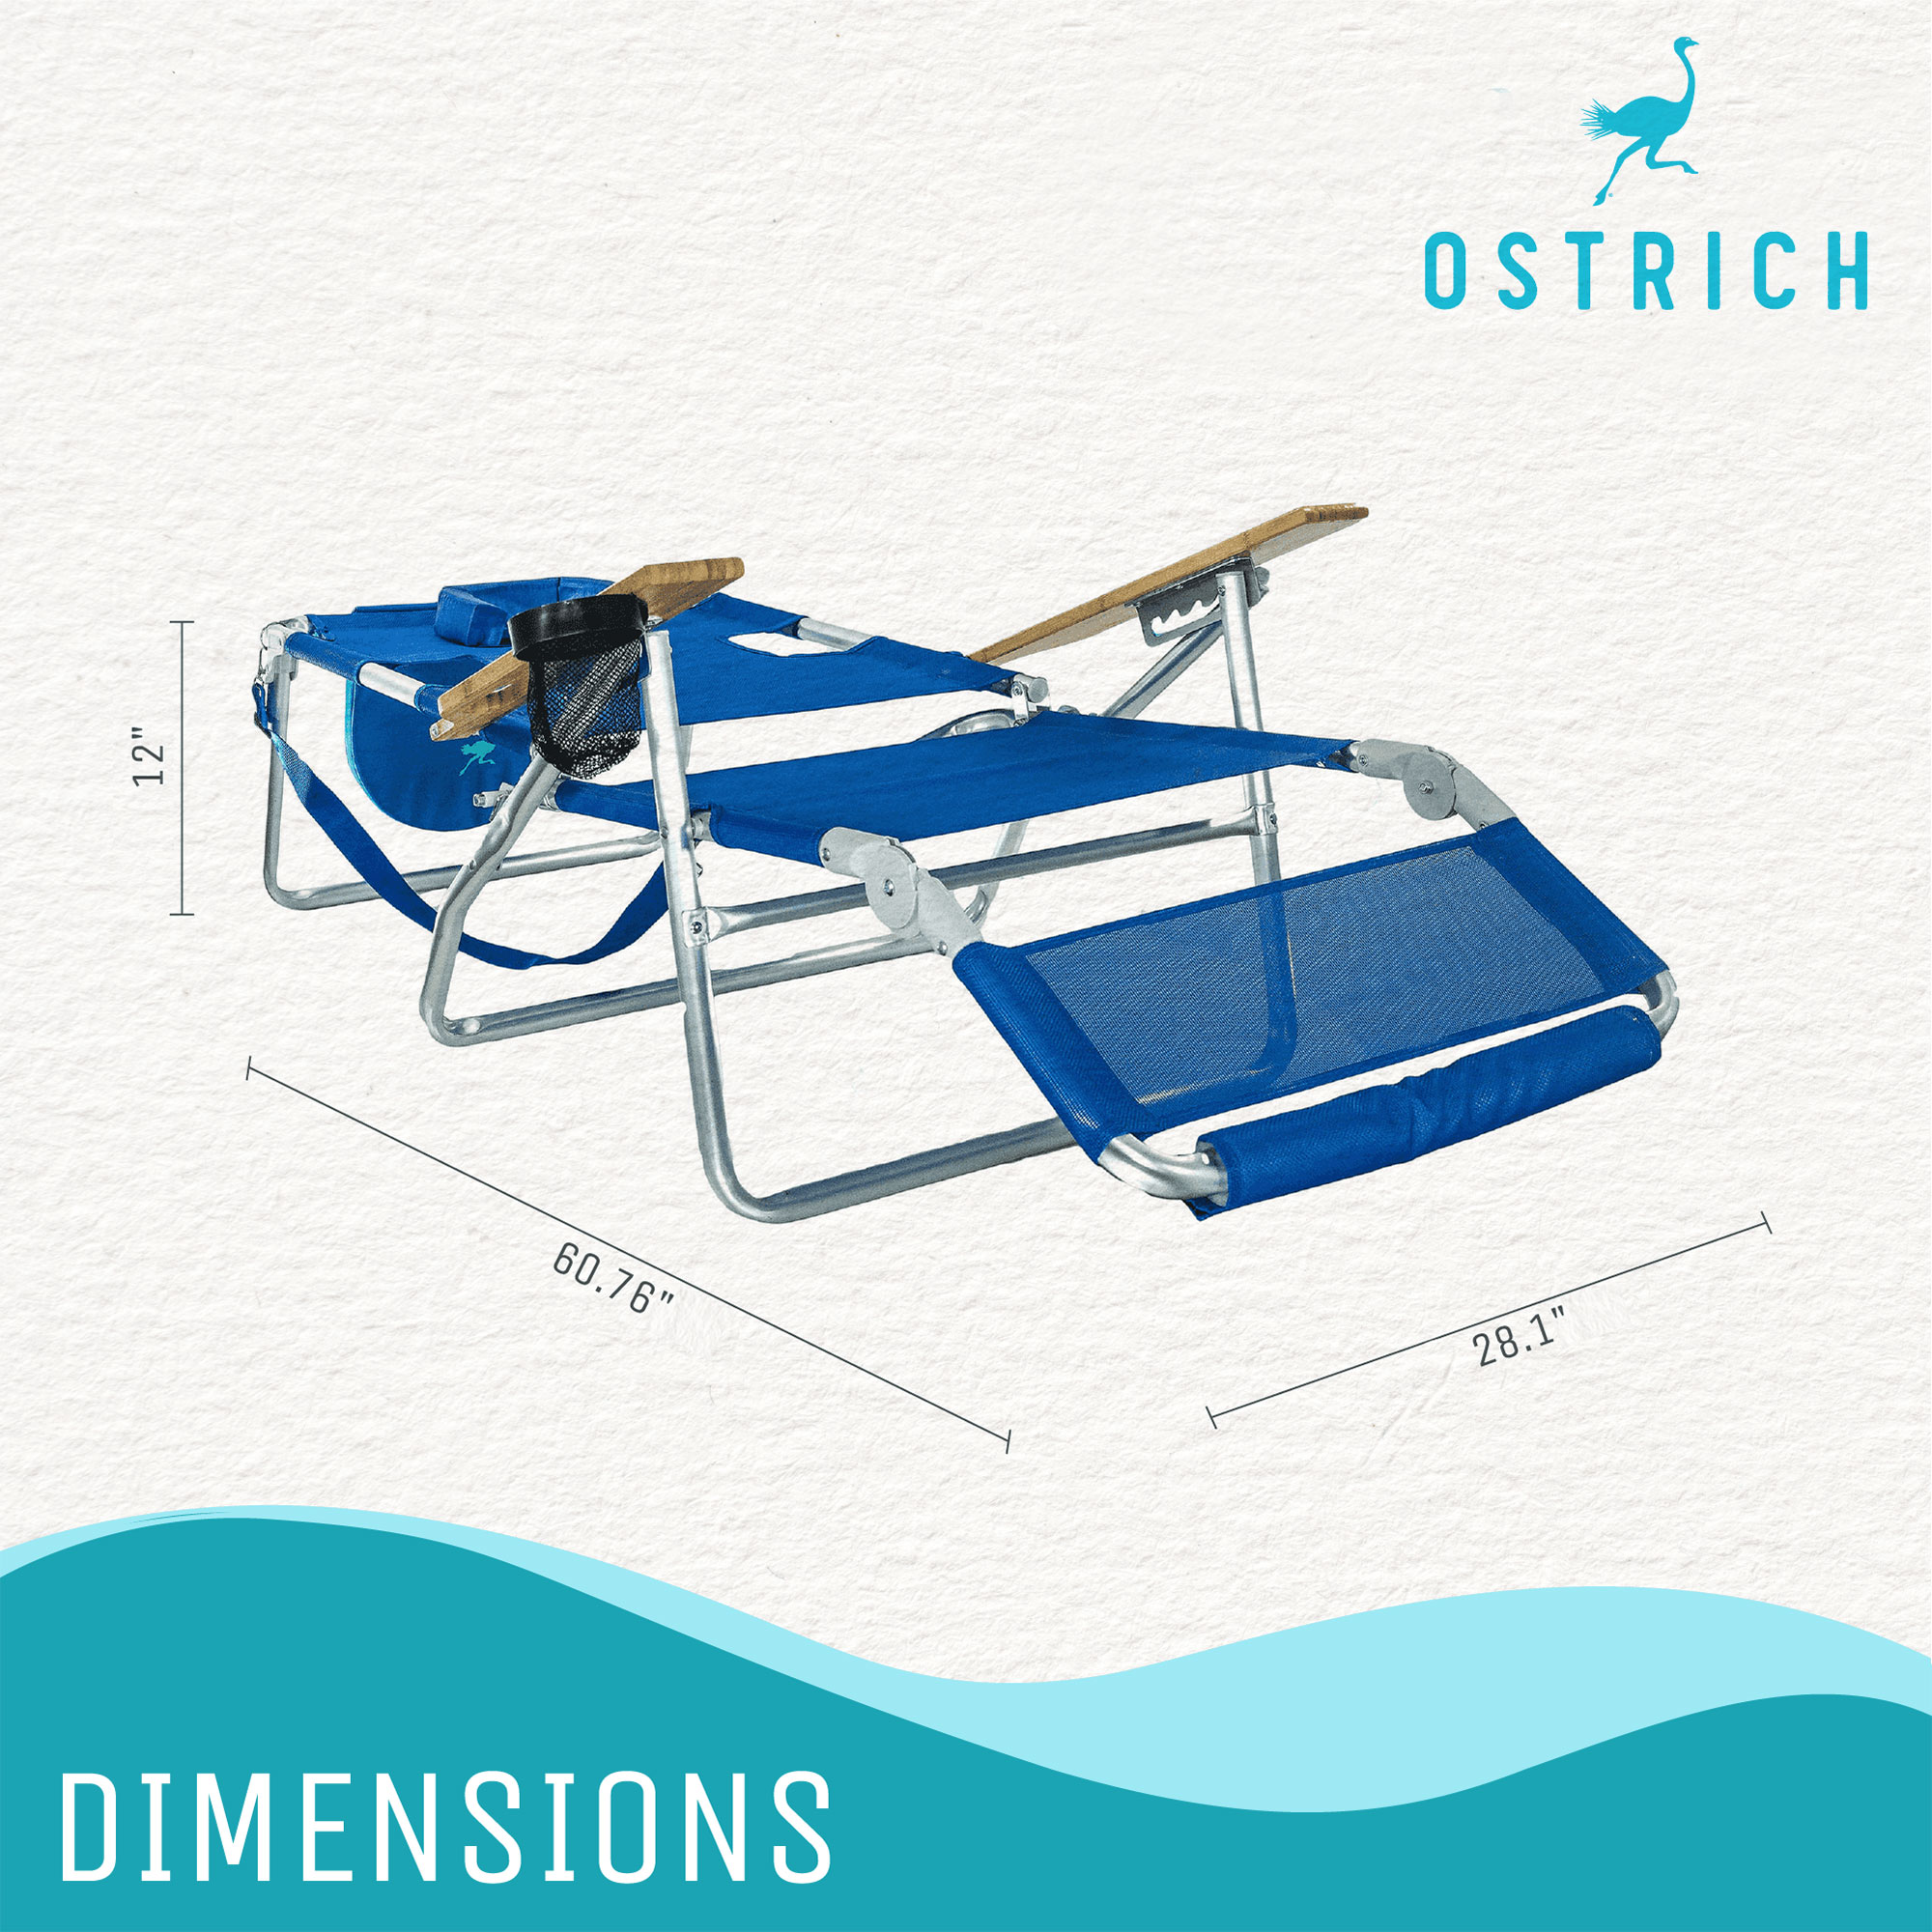 Ostrich 3N1 Lightweight Outdoor Beach Lounge Chair with Footrest, Blue - image 2 of 8